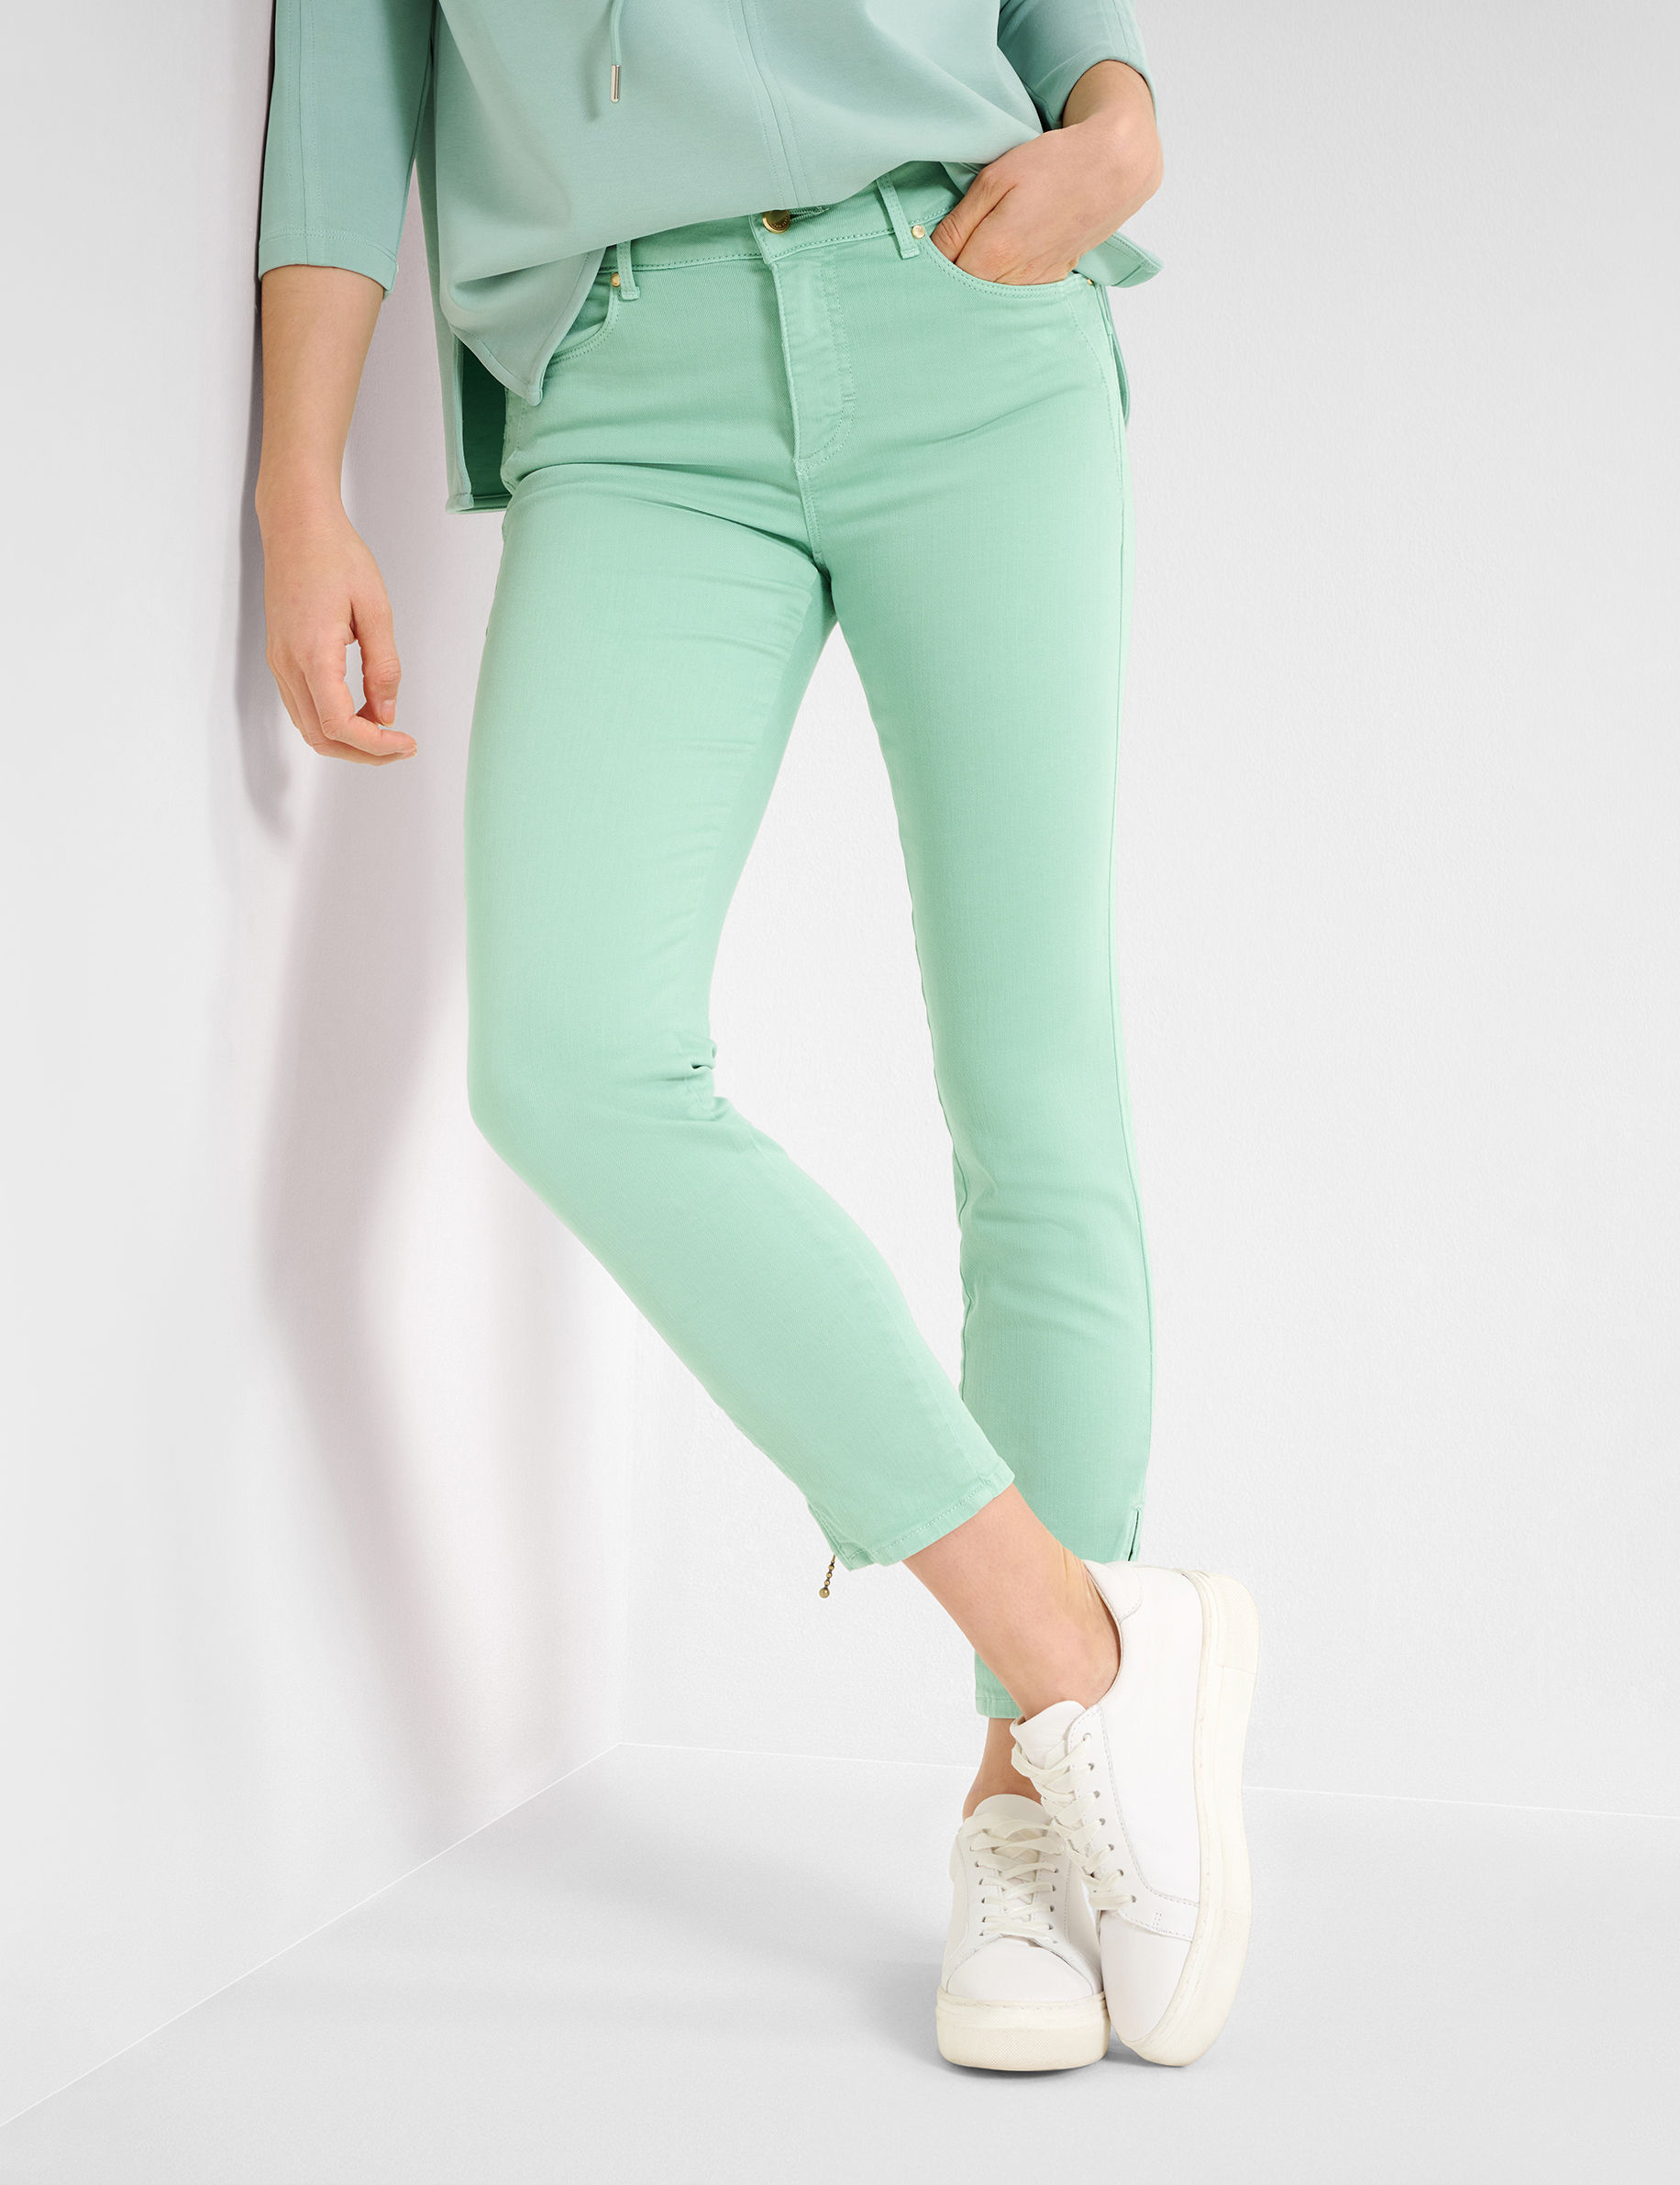 Women Style ANA S MINT Skinny Fit Model Front